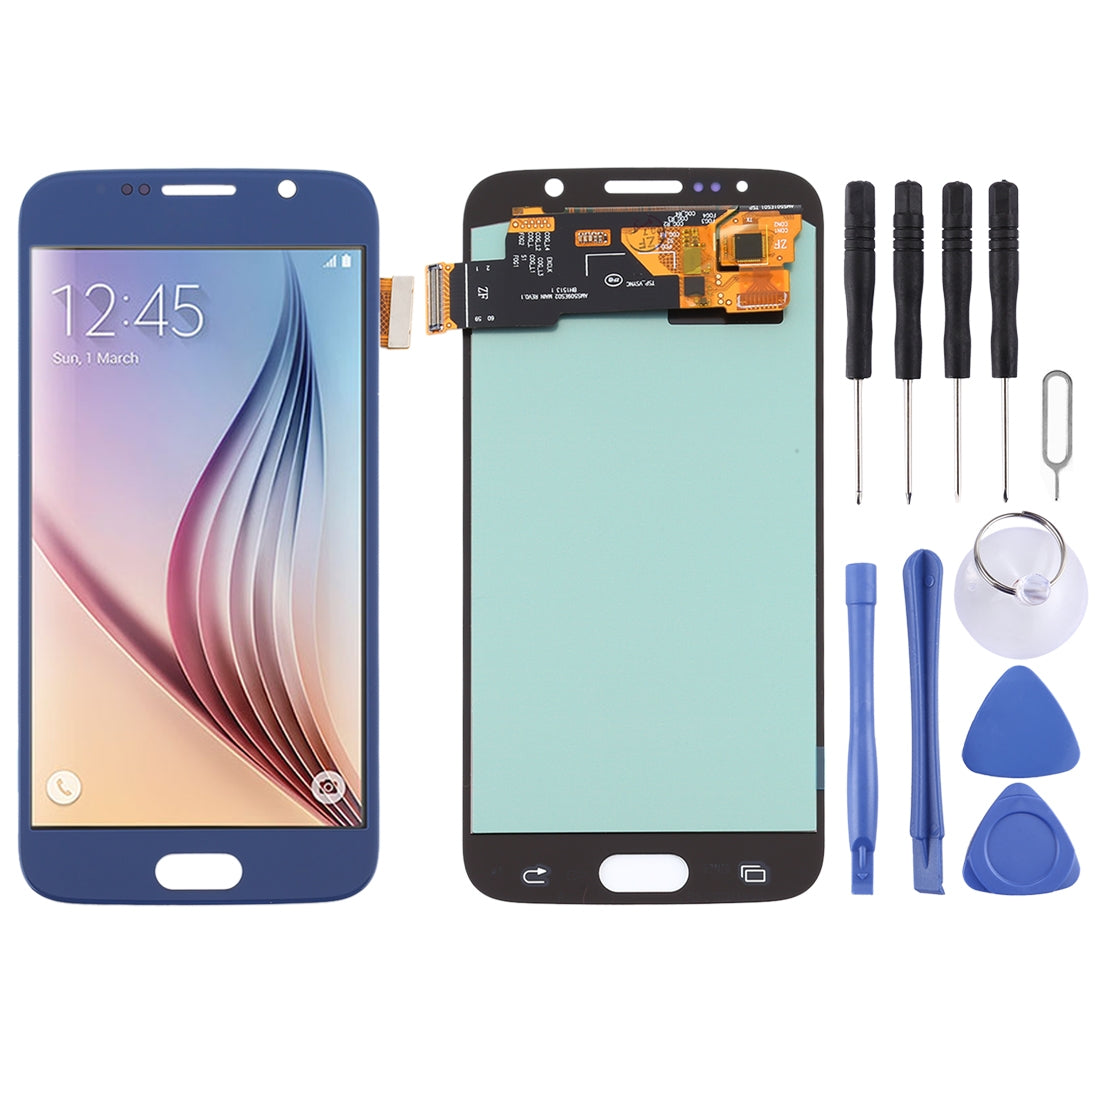 OLED Full Screen + Touch Digitizer Samsung Galaxy S6 Blue